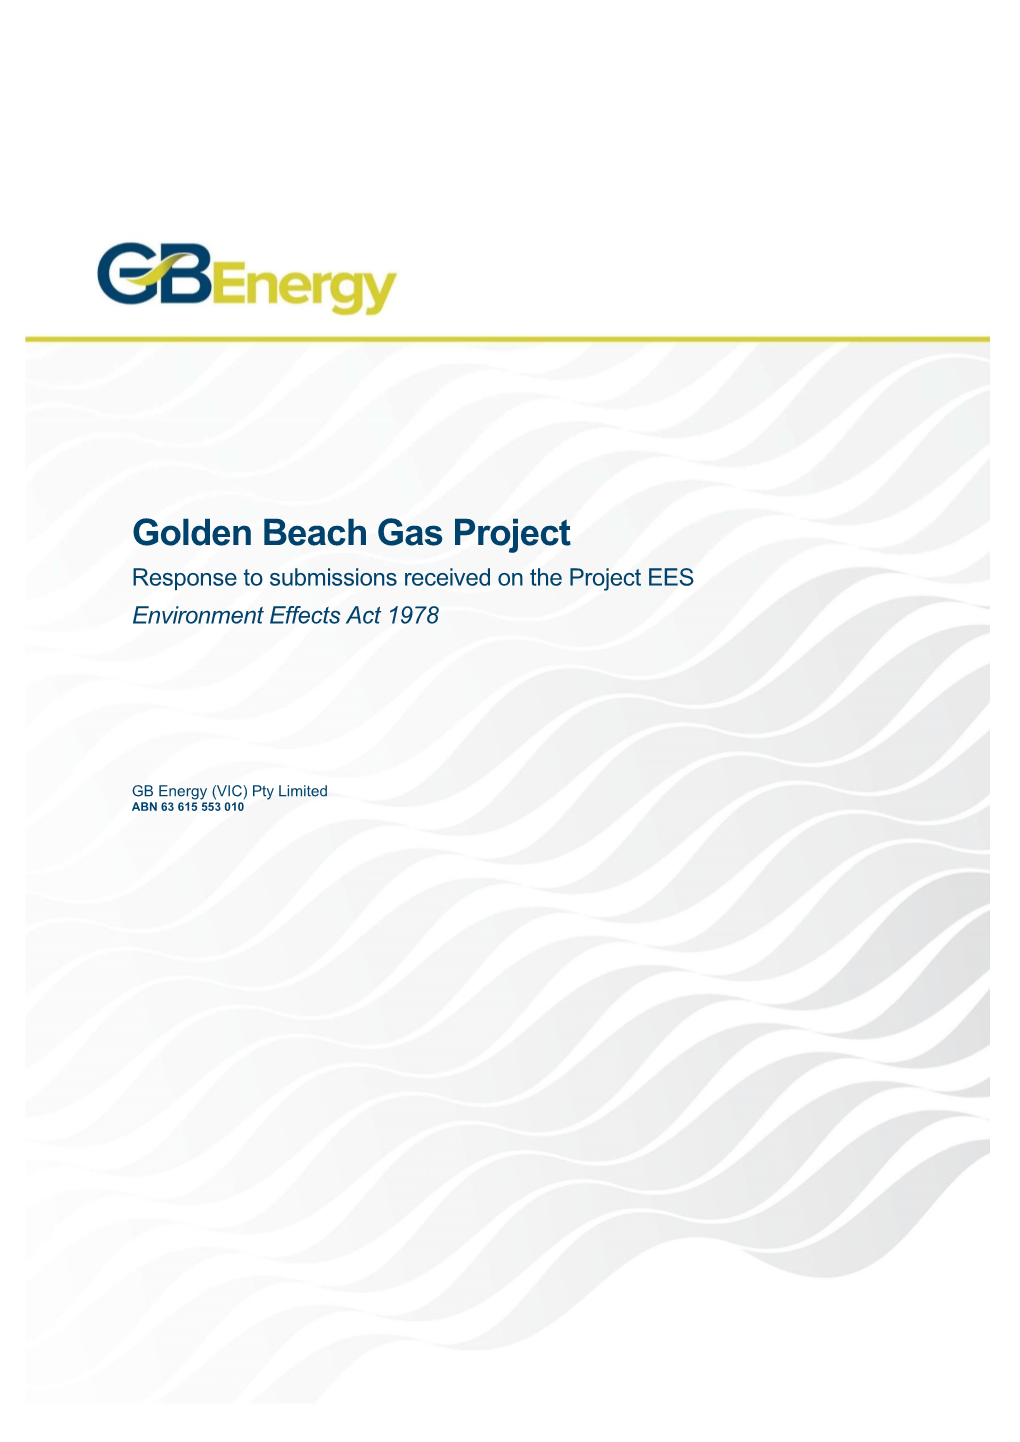 Golden Beach Gas Project Response to Submissions Received on the Project EES Environment Effects Act 1978